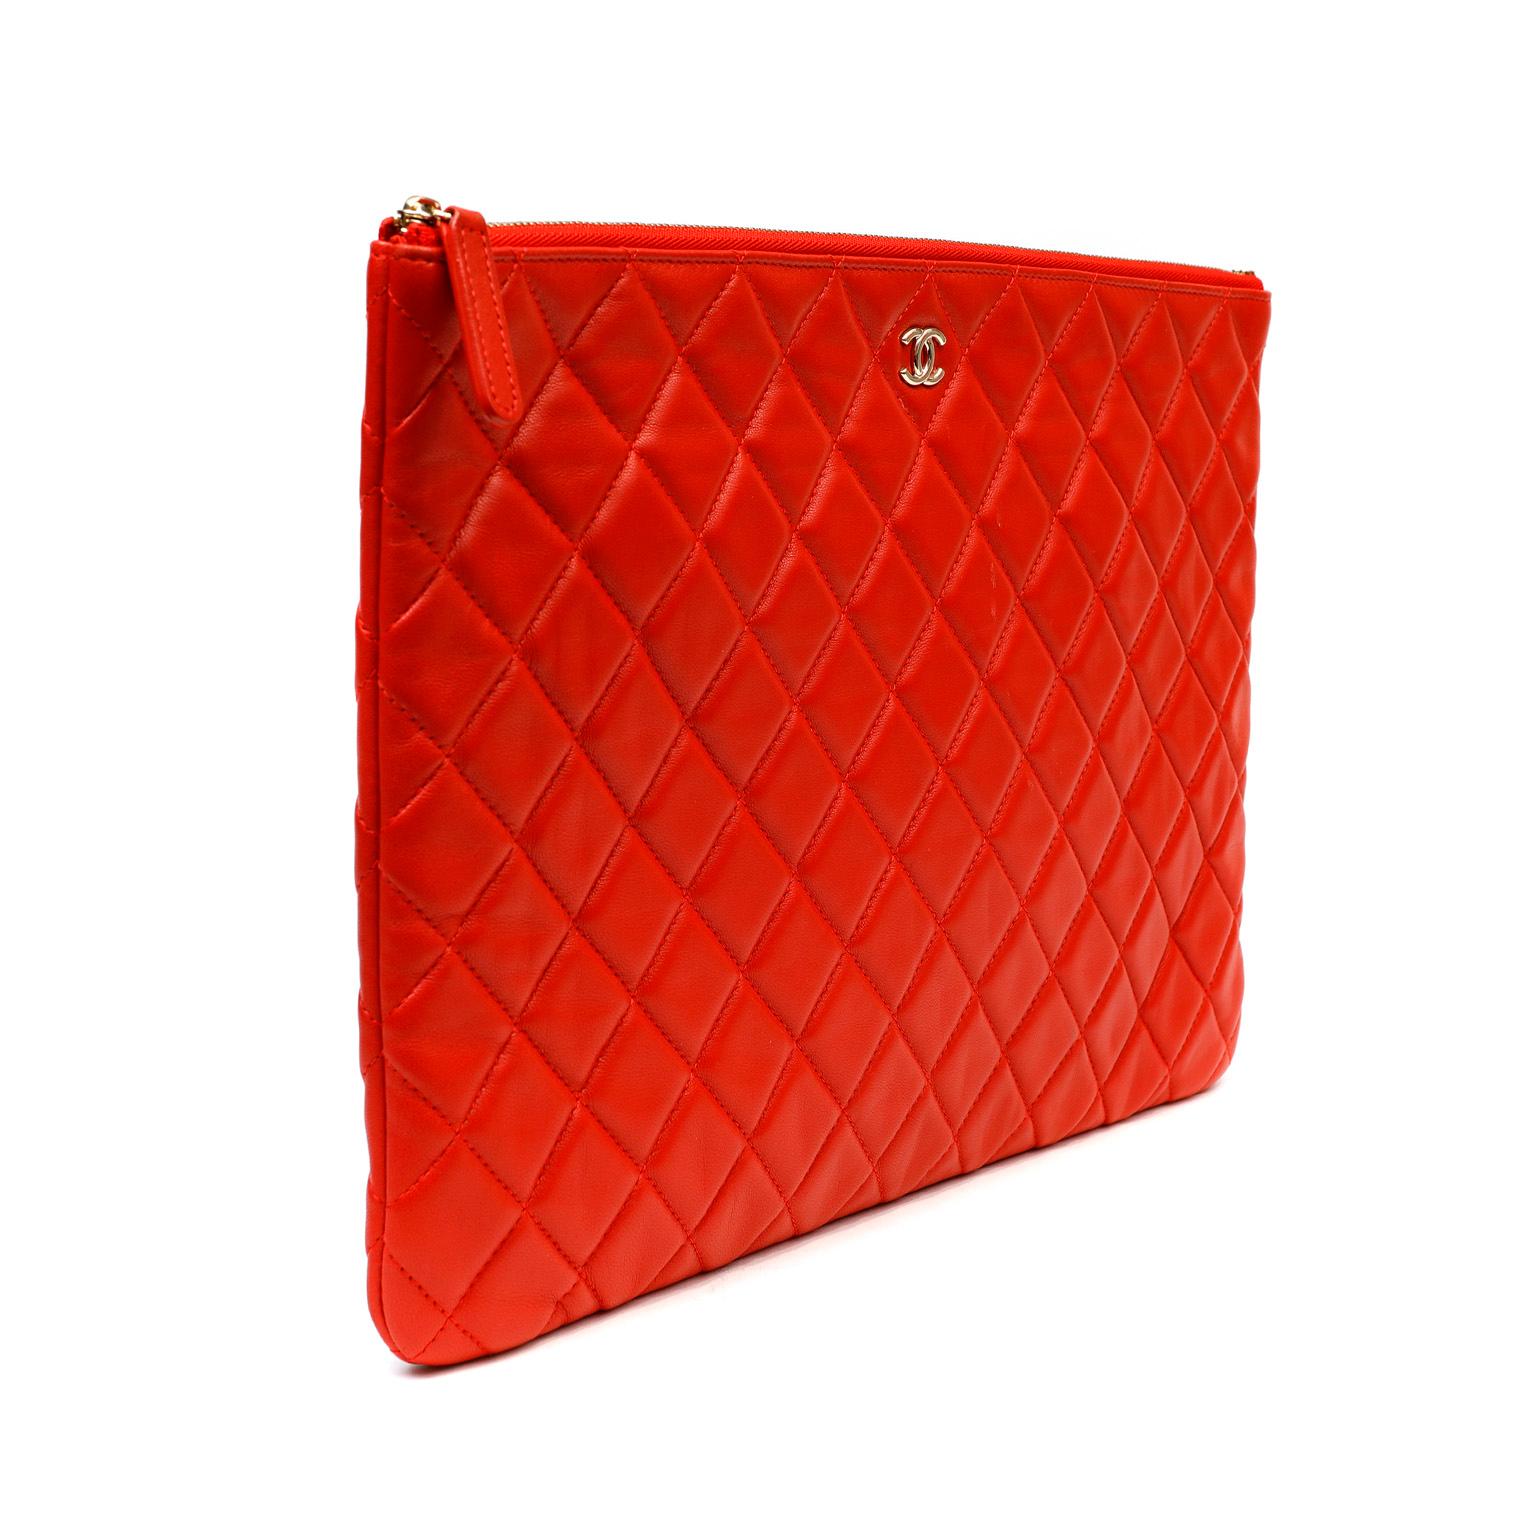 This authentic Chanel Red Lambskin Classic Case is in pristine condition.  Spacious slim zip top case is quilted in signature Chanel diamond pattern.  Silver hardware. Perfect for evening clutch carry or tossing inside a larger bag.  Dust bag